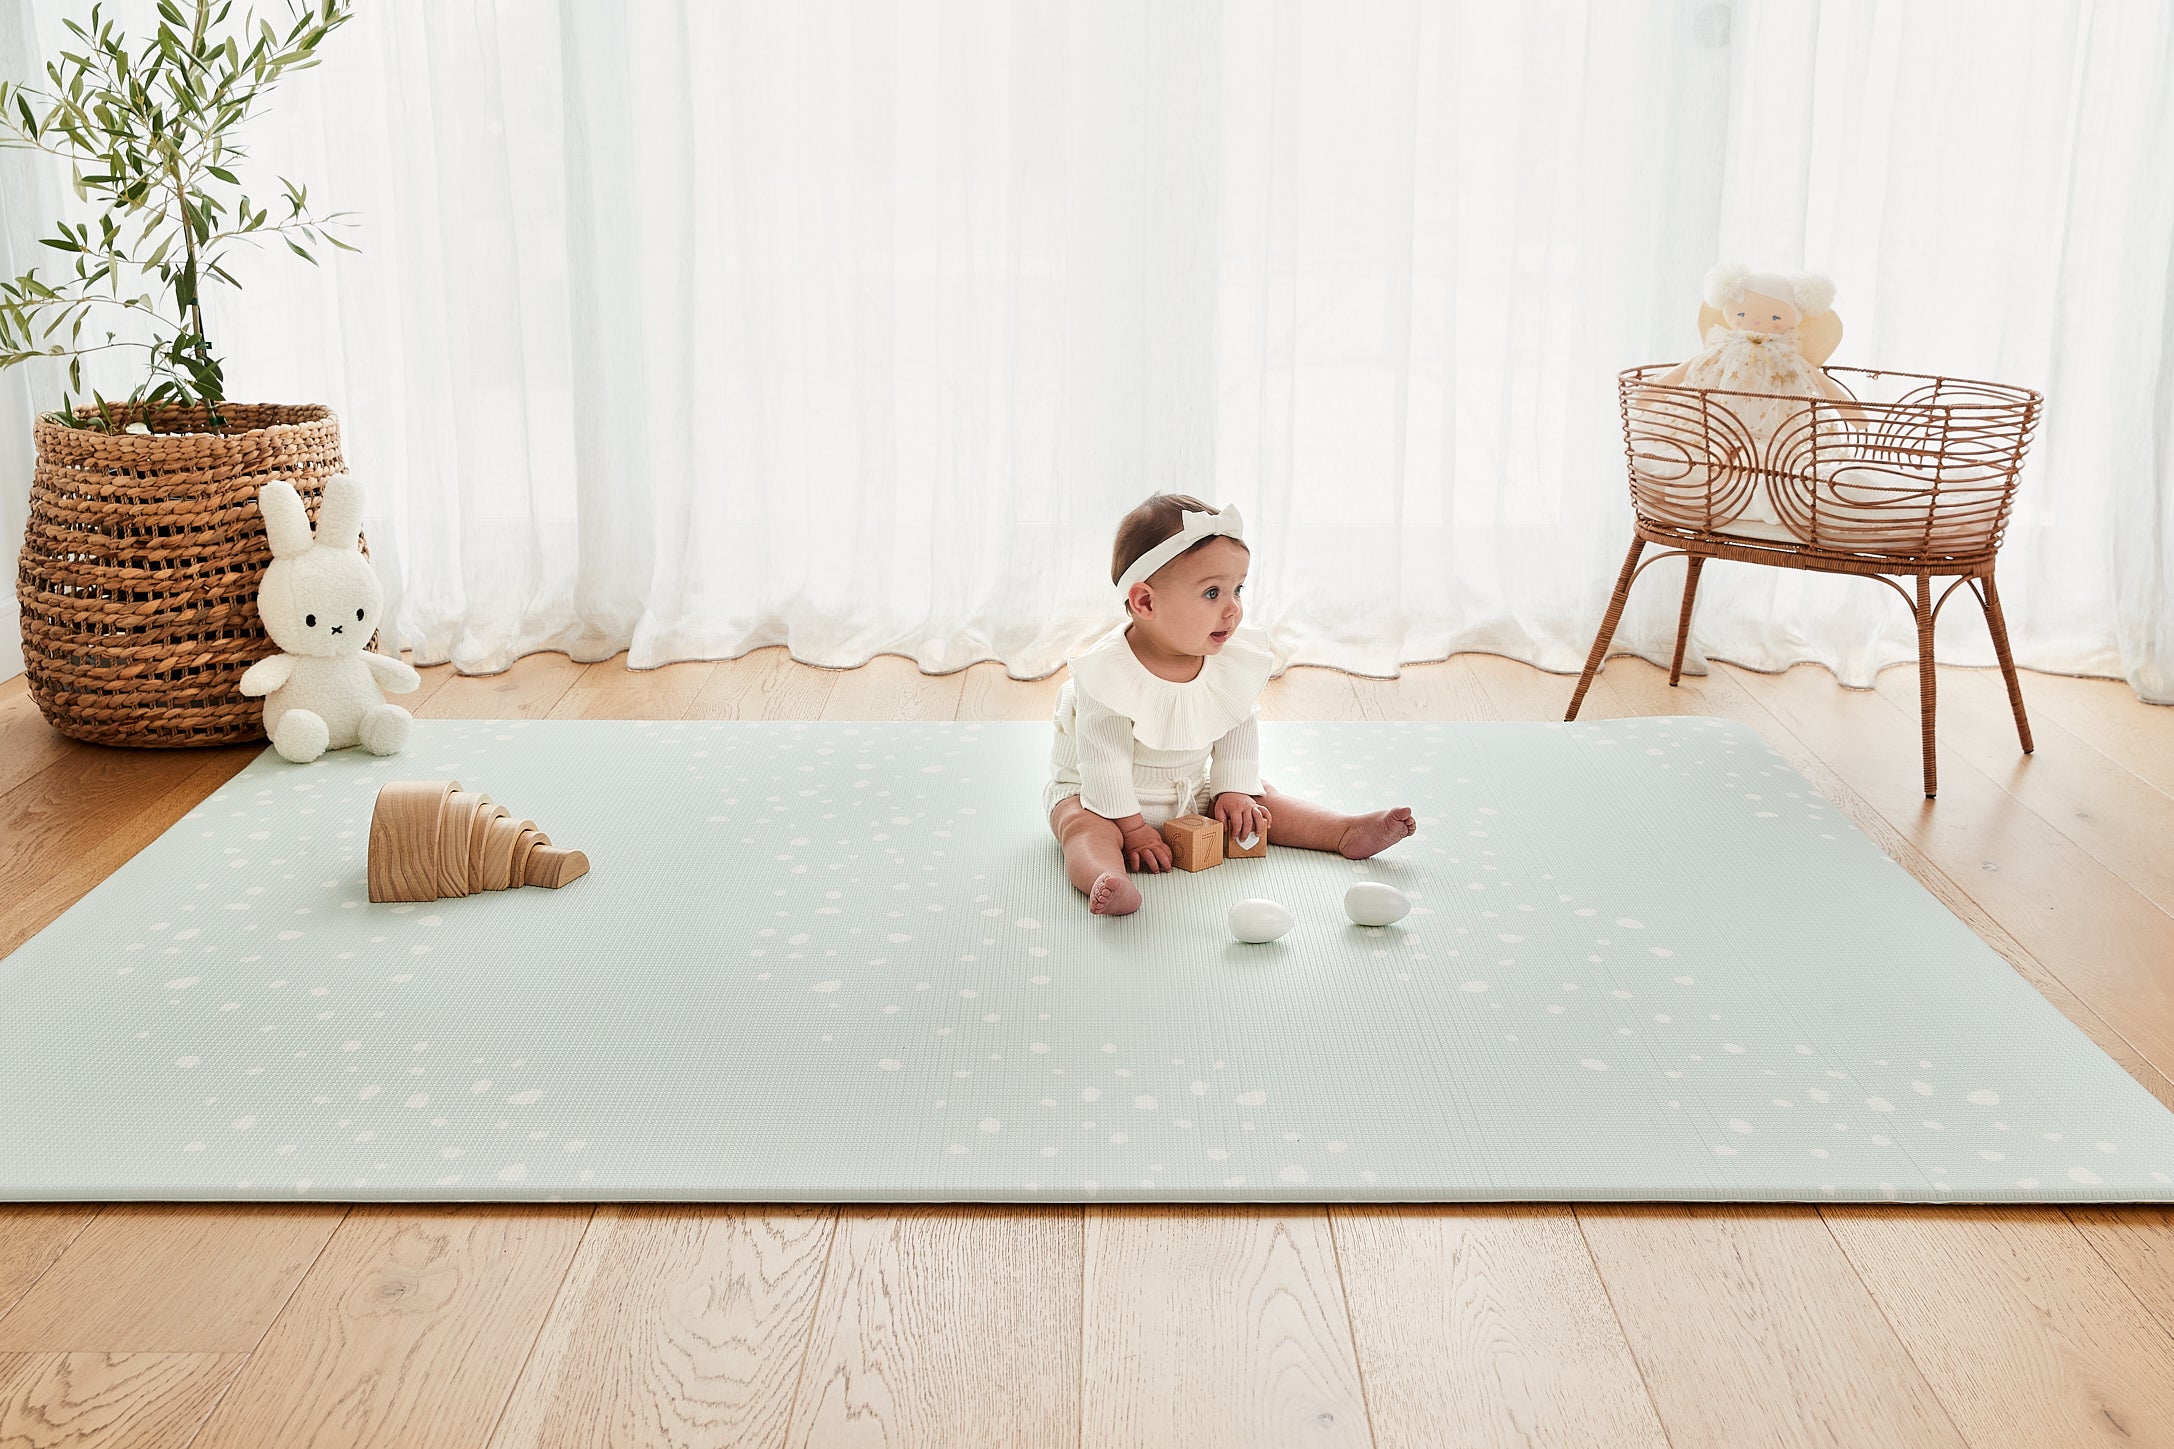 Large Padded Play Mats (200 x 140cm) – Harlow & Co Kids